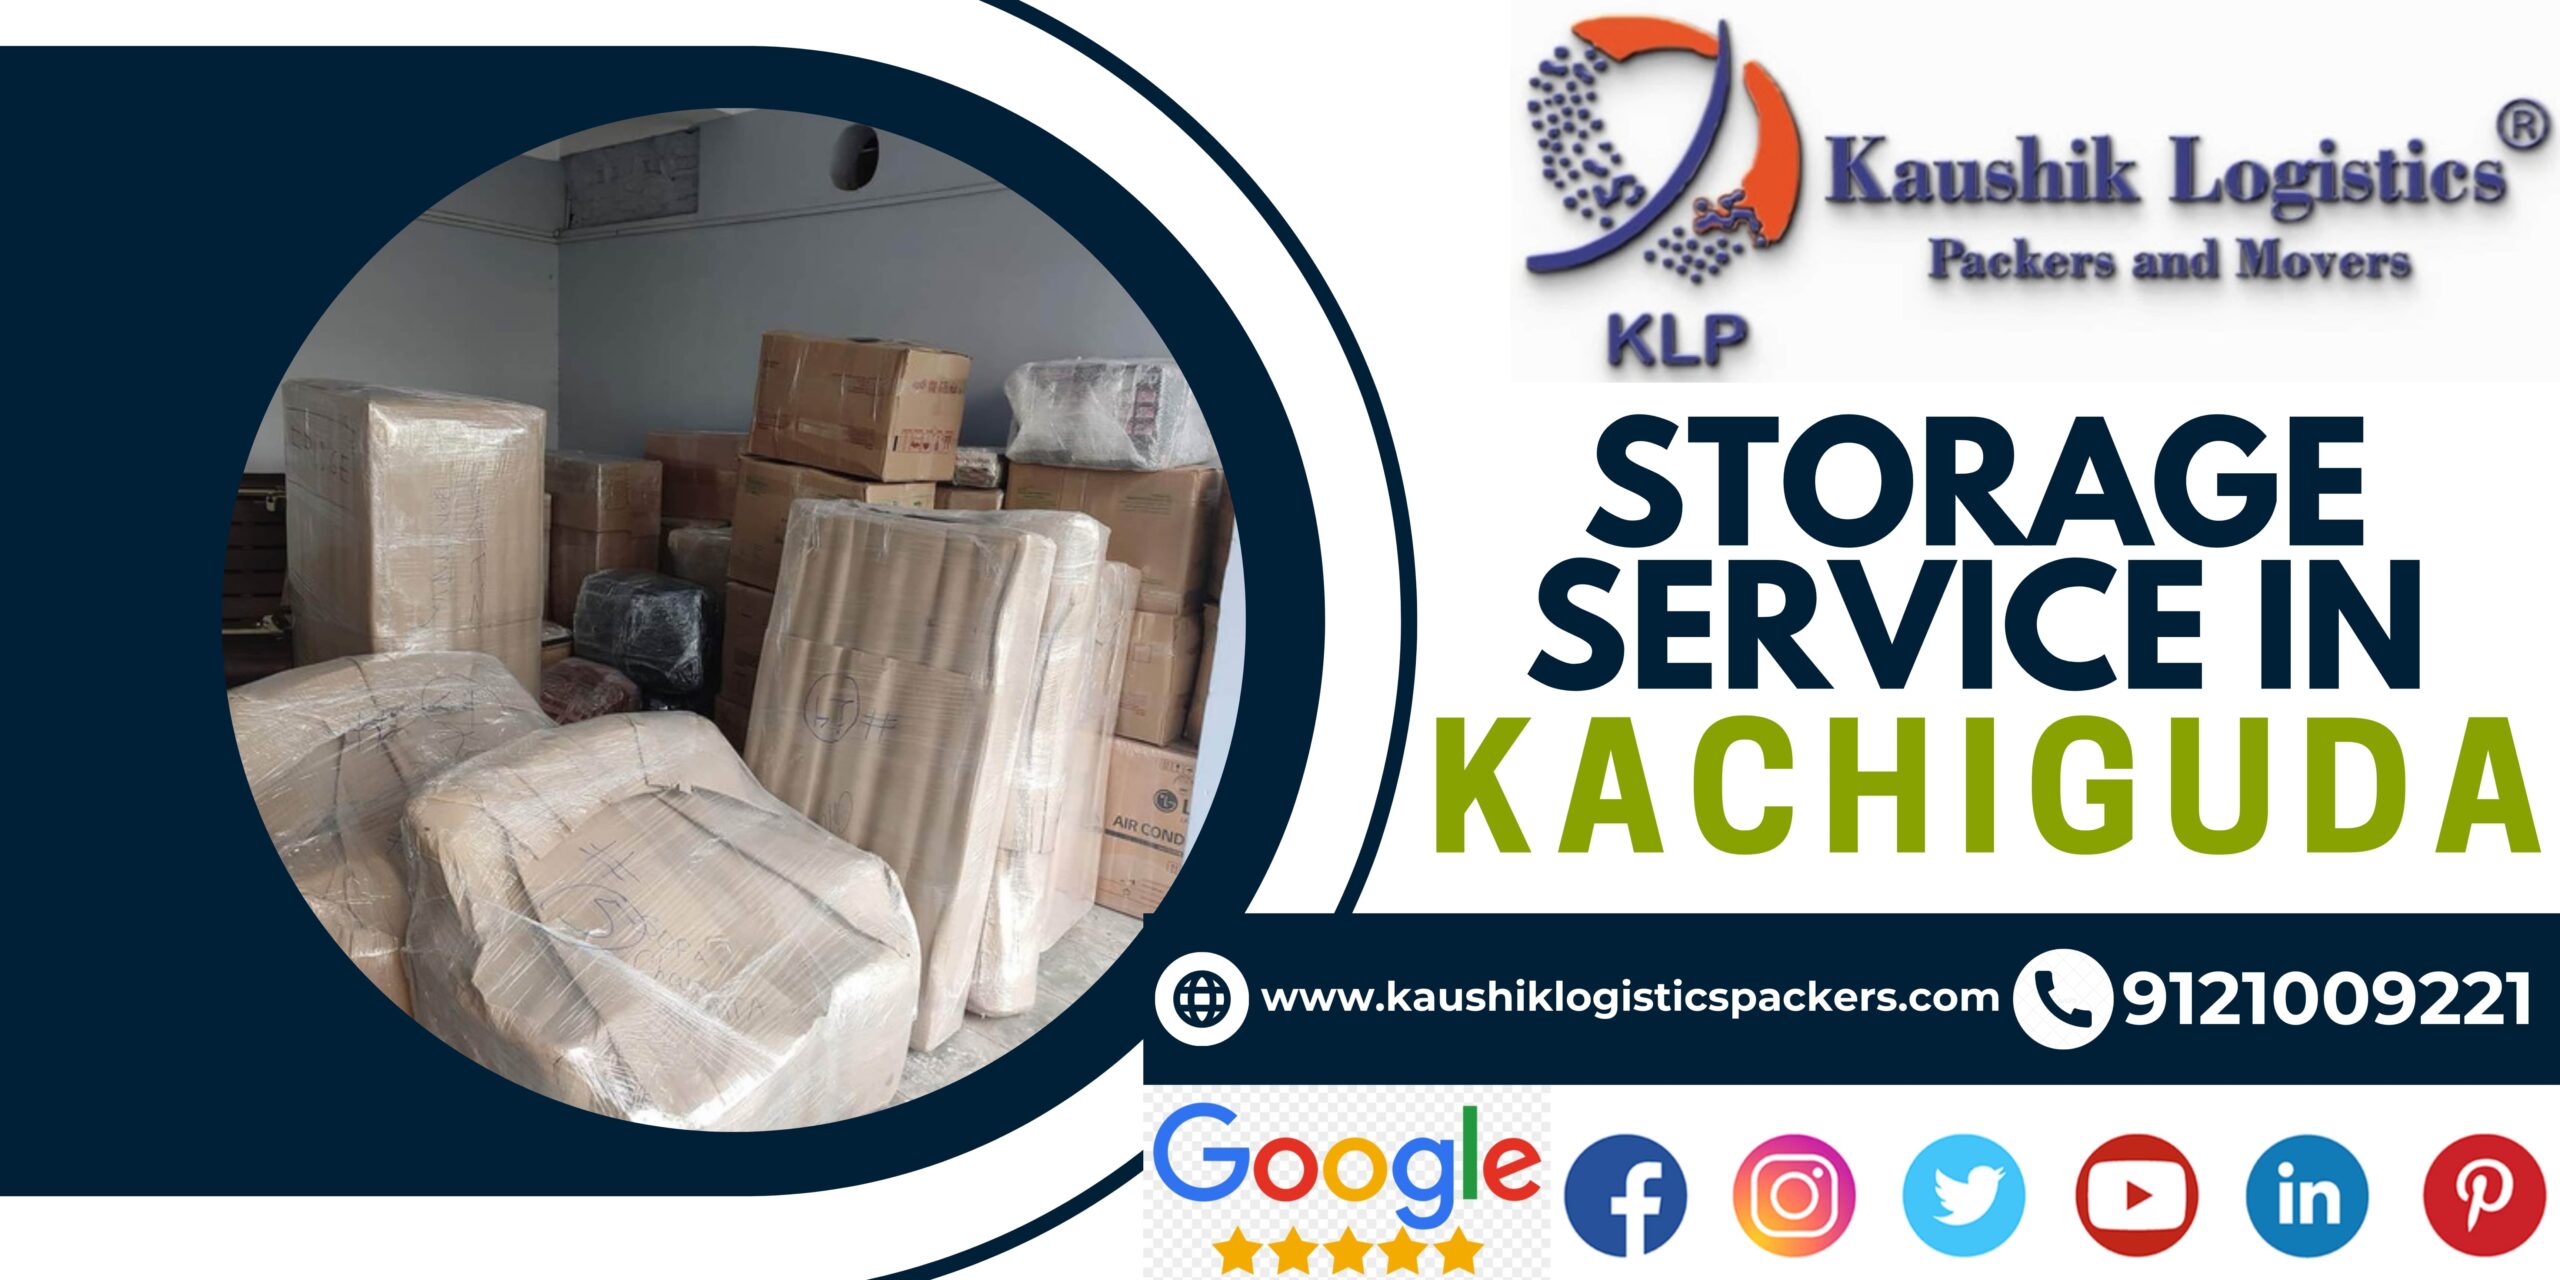 Packers and Movers In Kachiguda